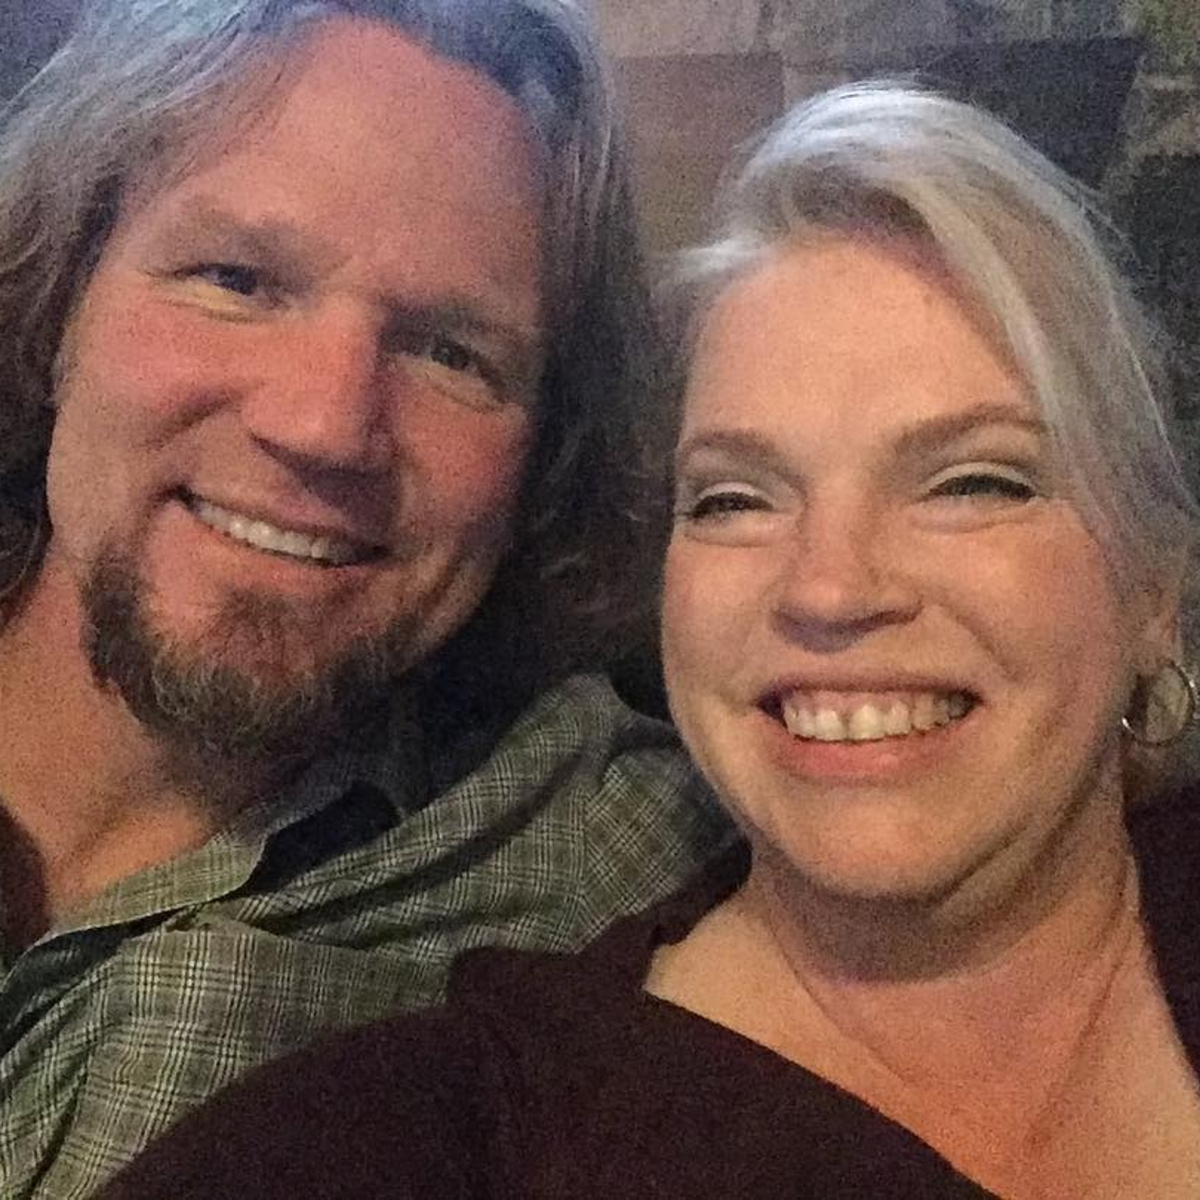 Janelle Brown Says “F–k You” to Kody in Sister Wives Trailer